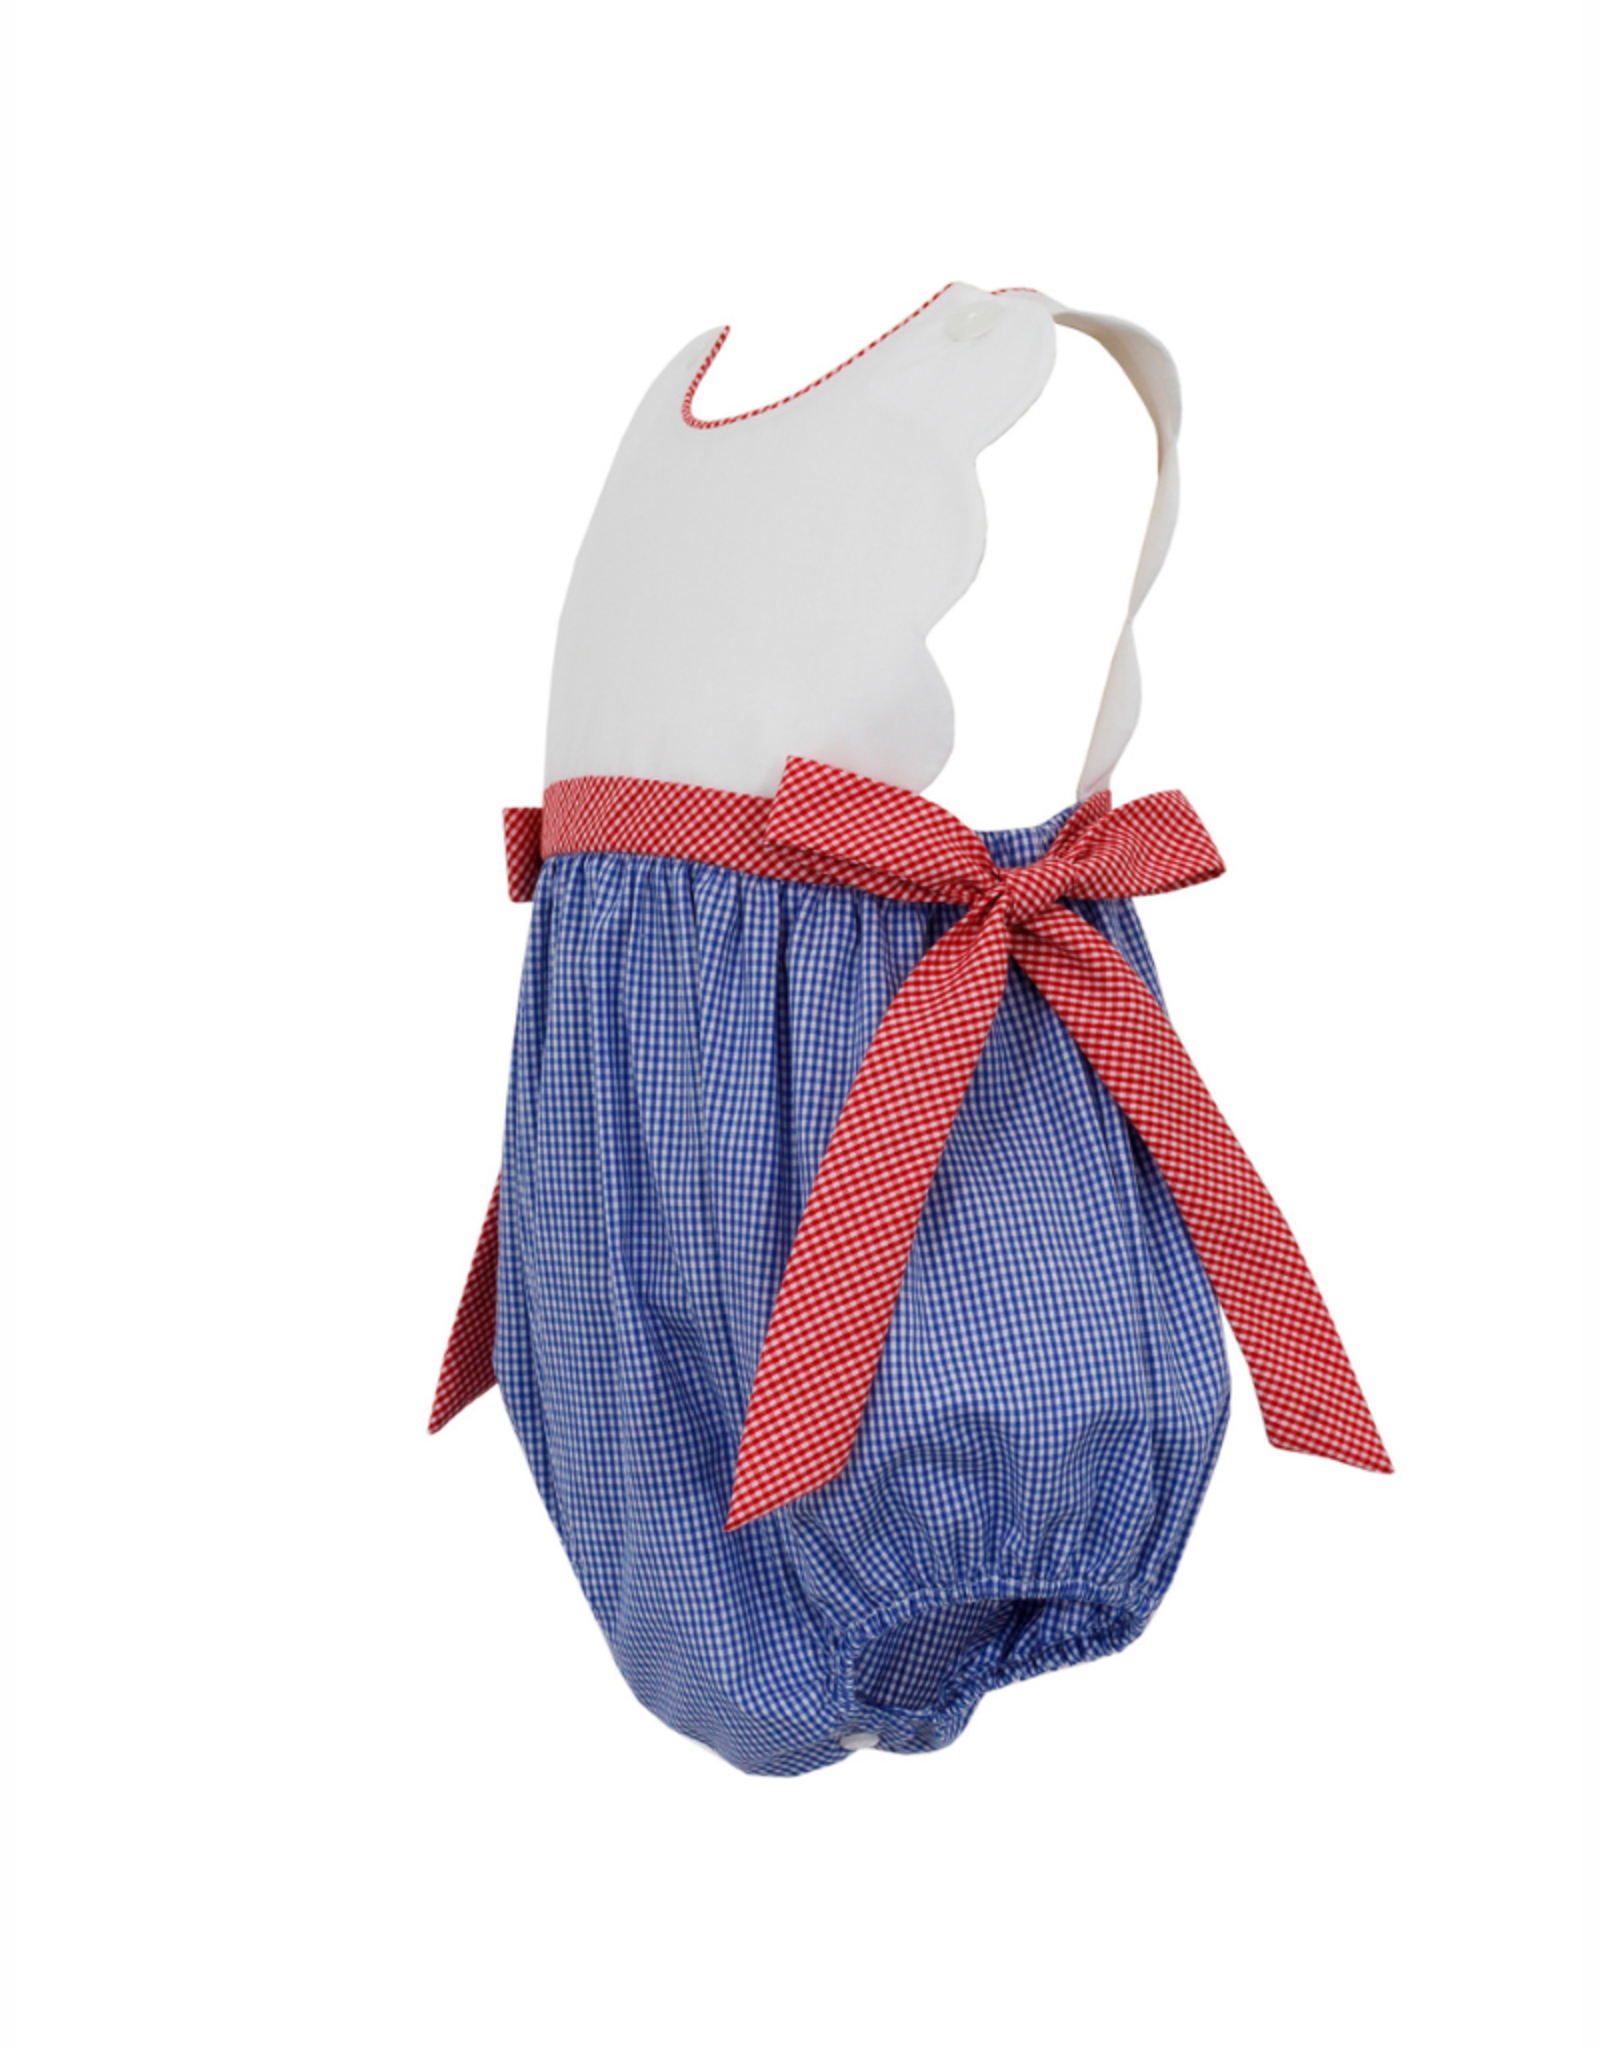 Petit Bebe Royal Blue Scallop Sunbubble with Red Gingham Side Bows